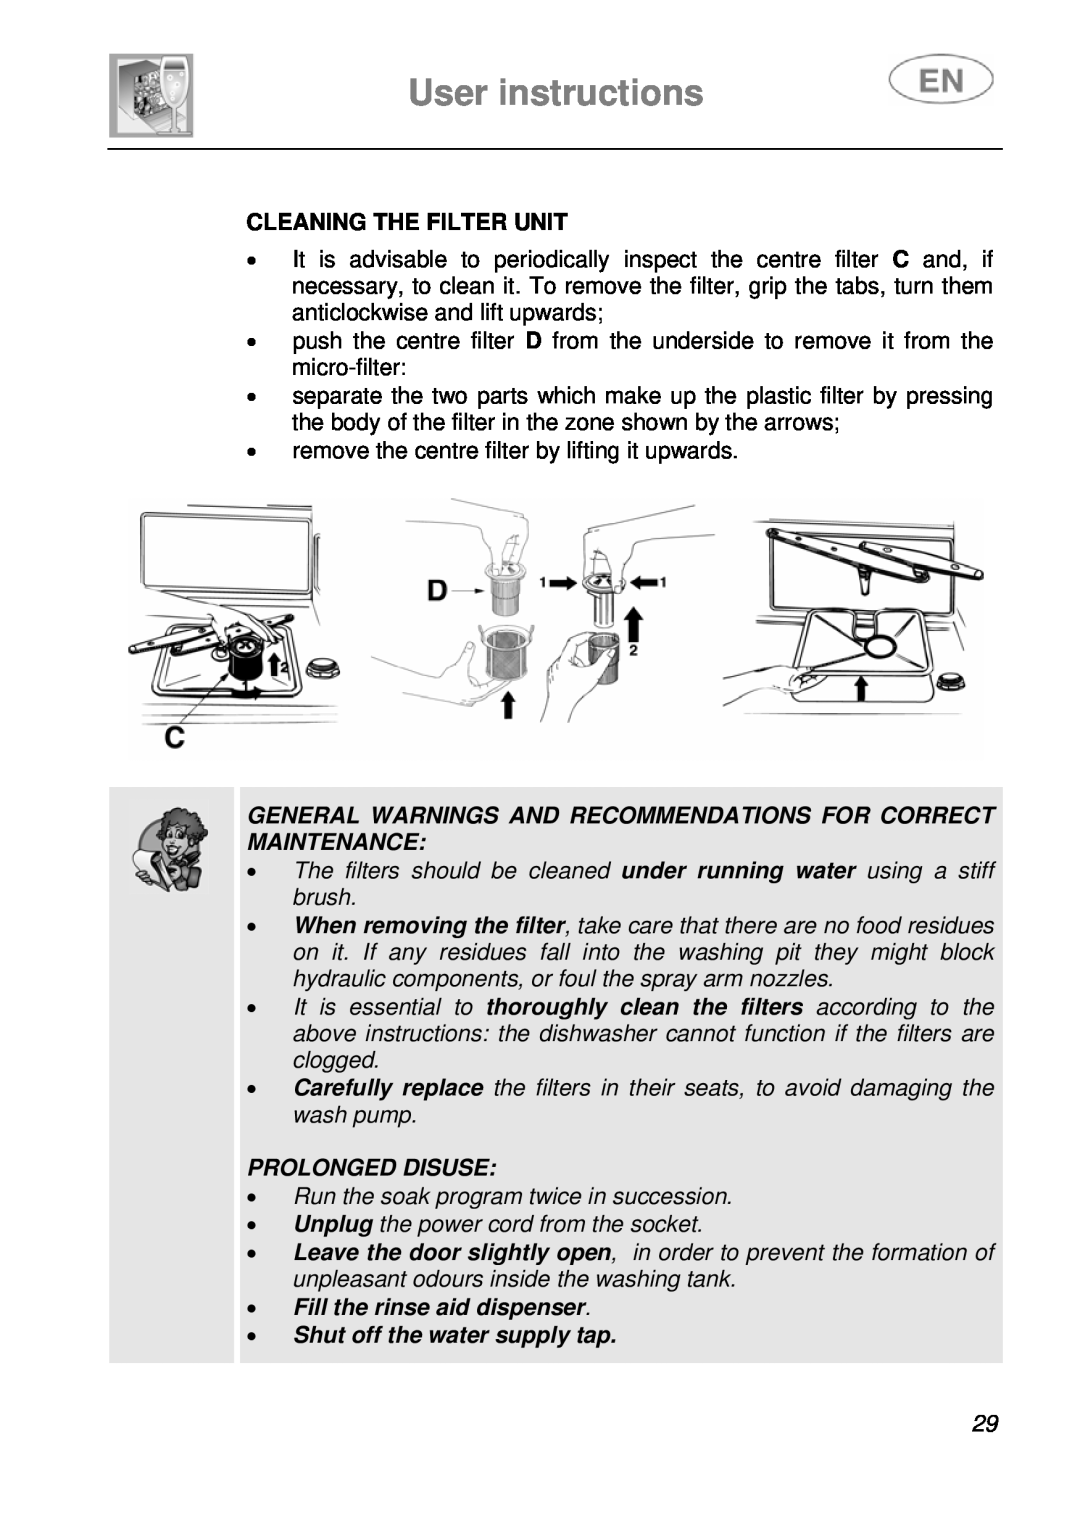 Smeg LVF649B instruction manual User instructions, Cleaning The Filter Unit, Prolonged Disuse, Fill the rinse aid dispenser 